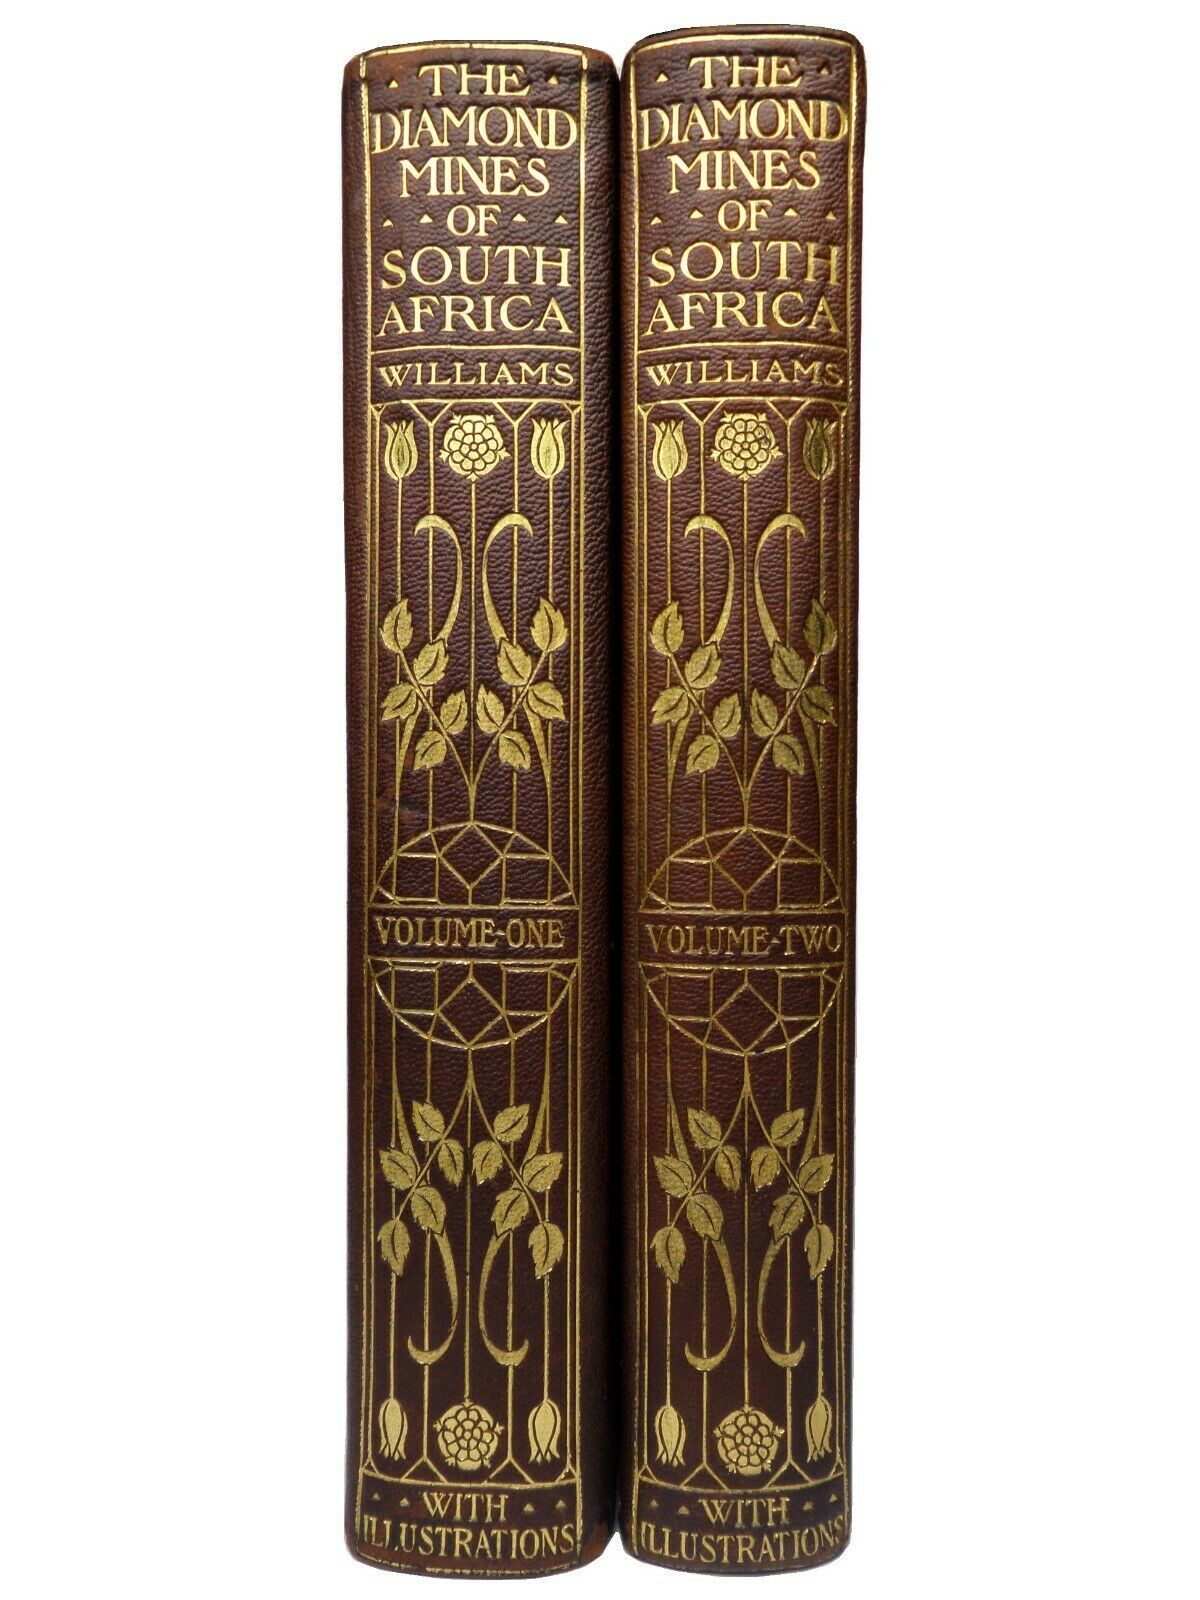 THE DIAMOND MINES OF SOUTH AFRICA BY GARDNER F. WILLIAMS 1905 IN TWO VOLUMES